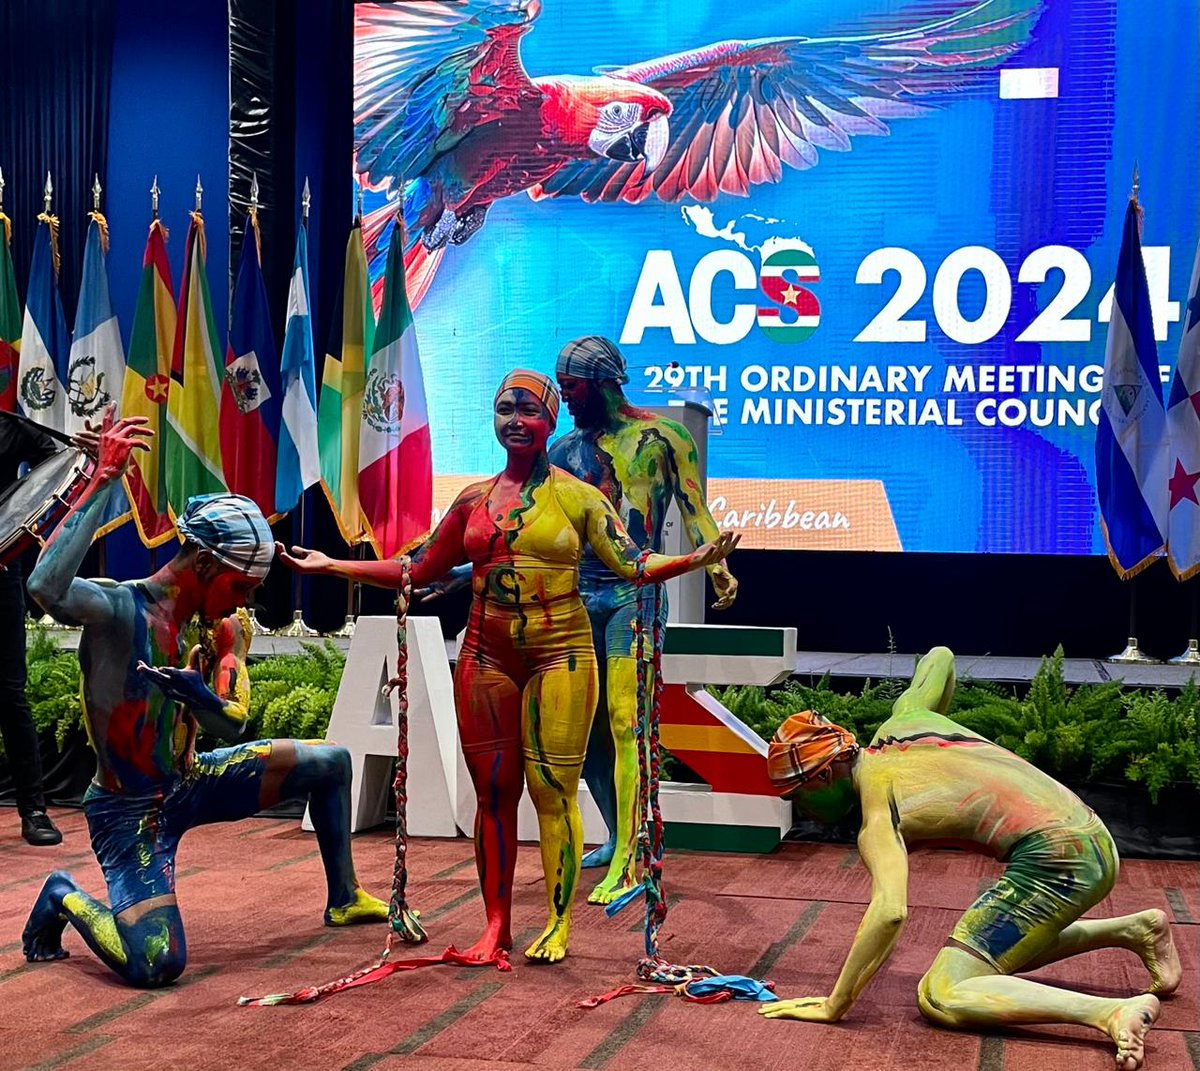 During the 29th session of the Council of Ministers of the @ACS_AEC , the Gov. of Suriname showed the strength of Surinamese culture and traditions; occasion in which Mexico reaffirmed its commitment to the objectives of the ACS continue working for the Greater Caribbean.